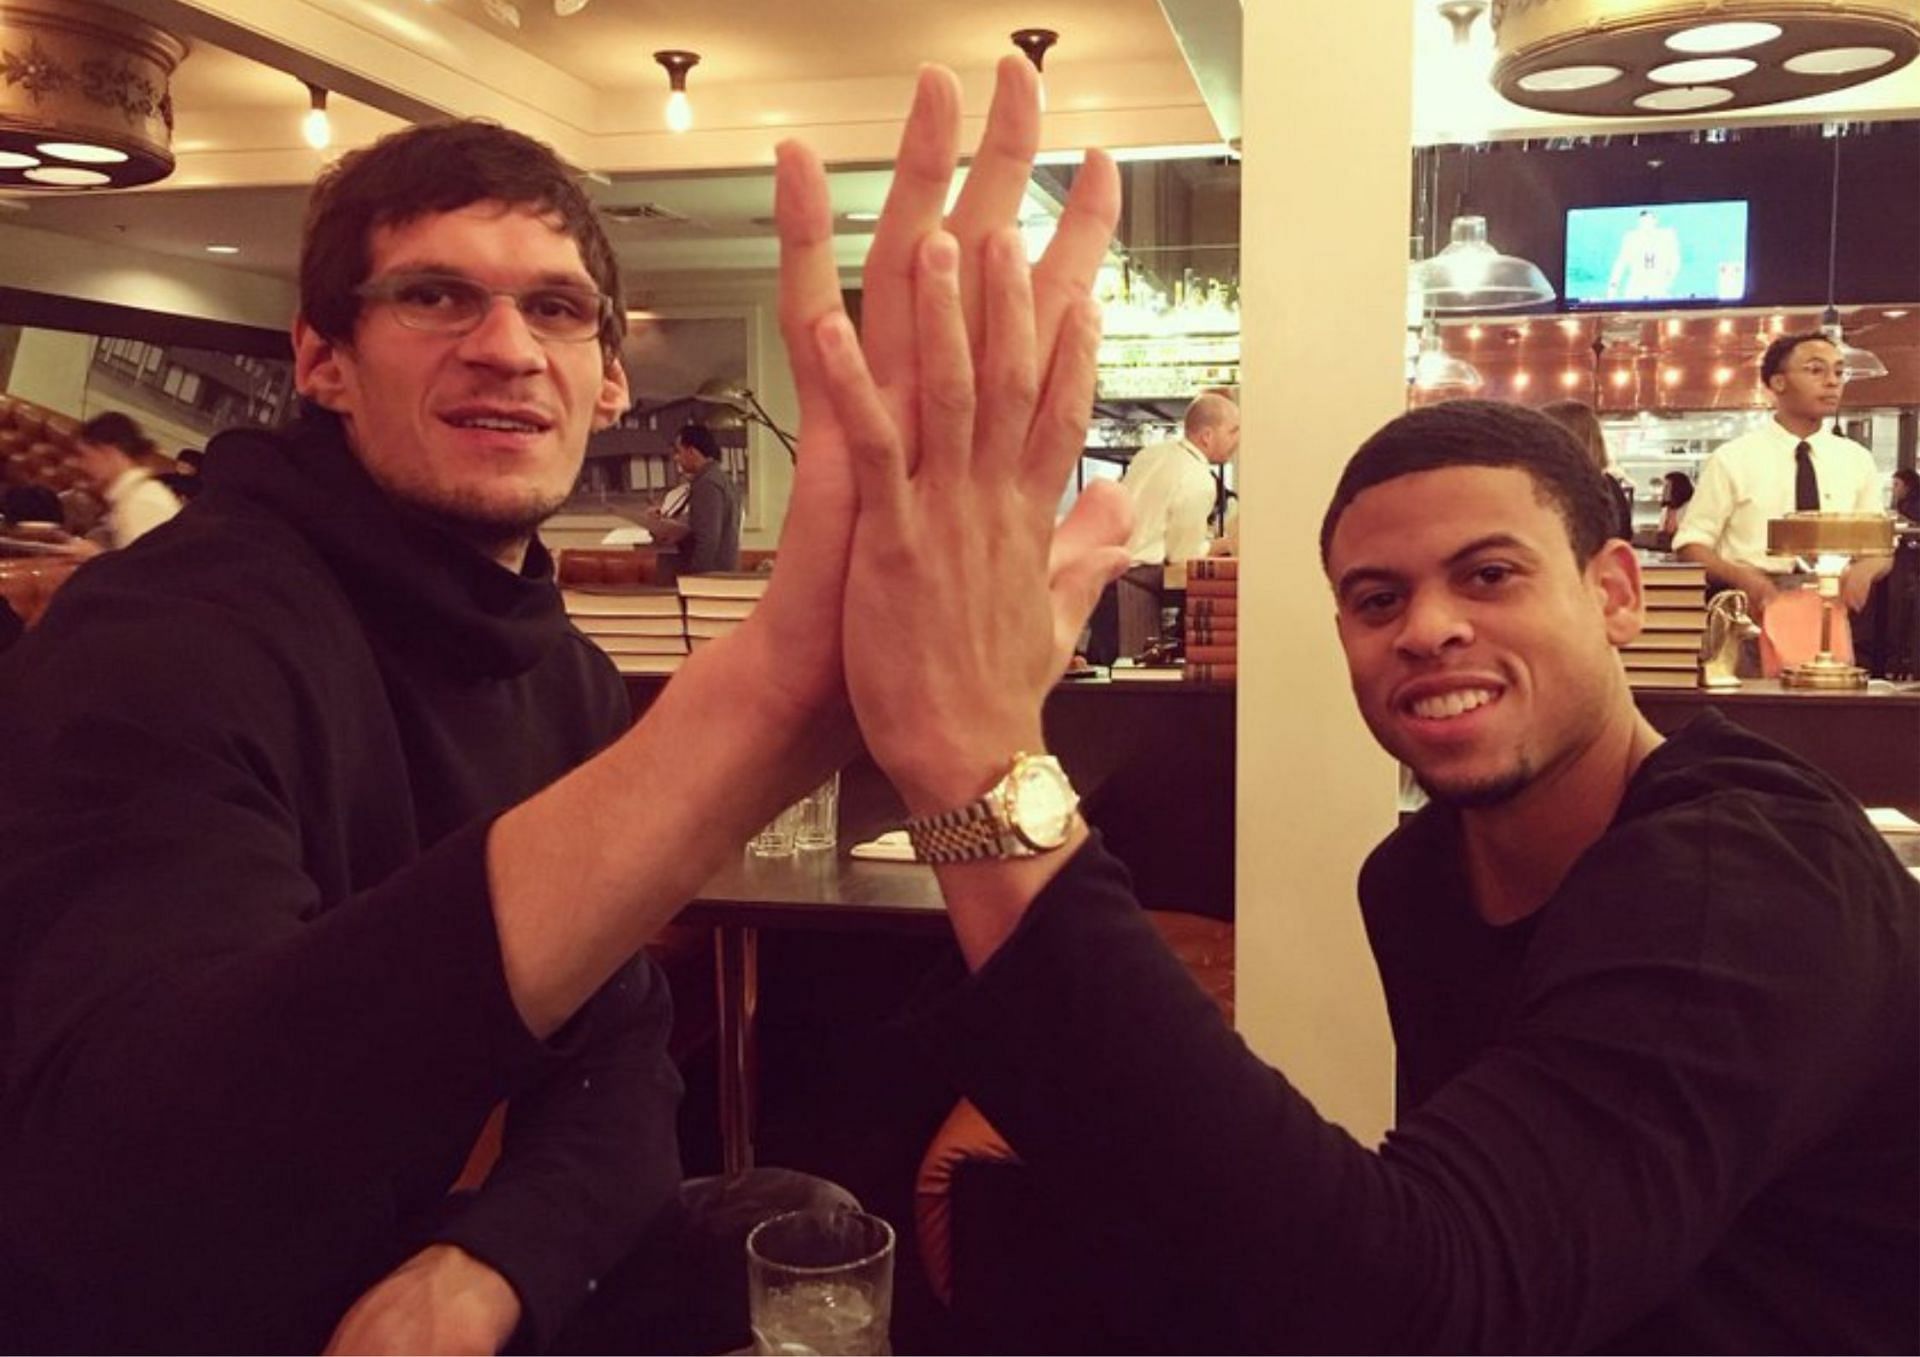 Who has the biggest hands in the league? Let's have a look at the